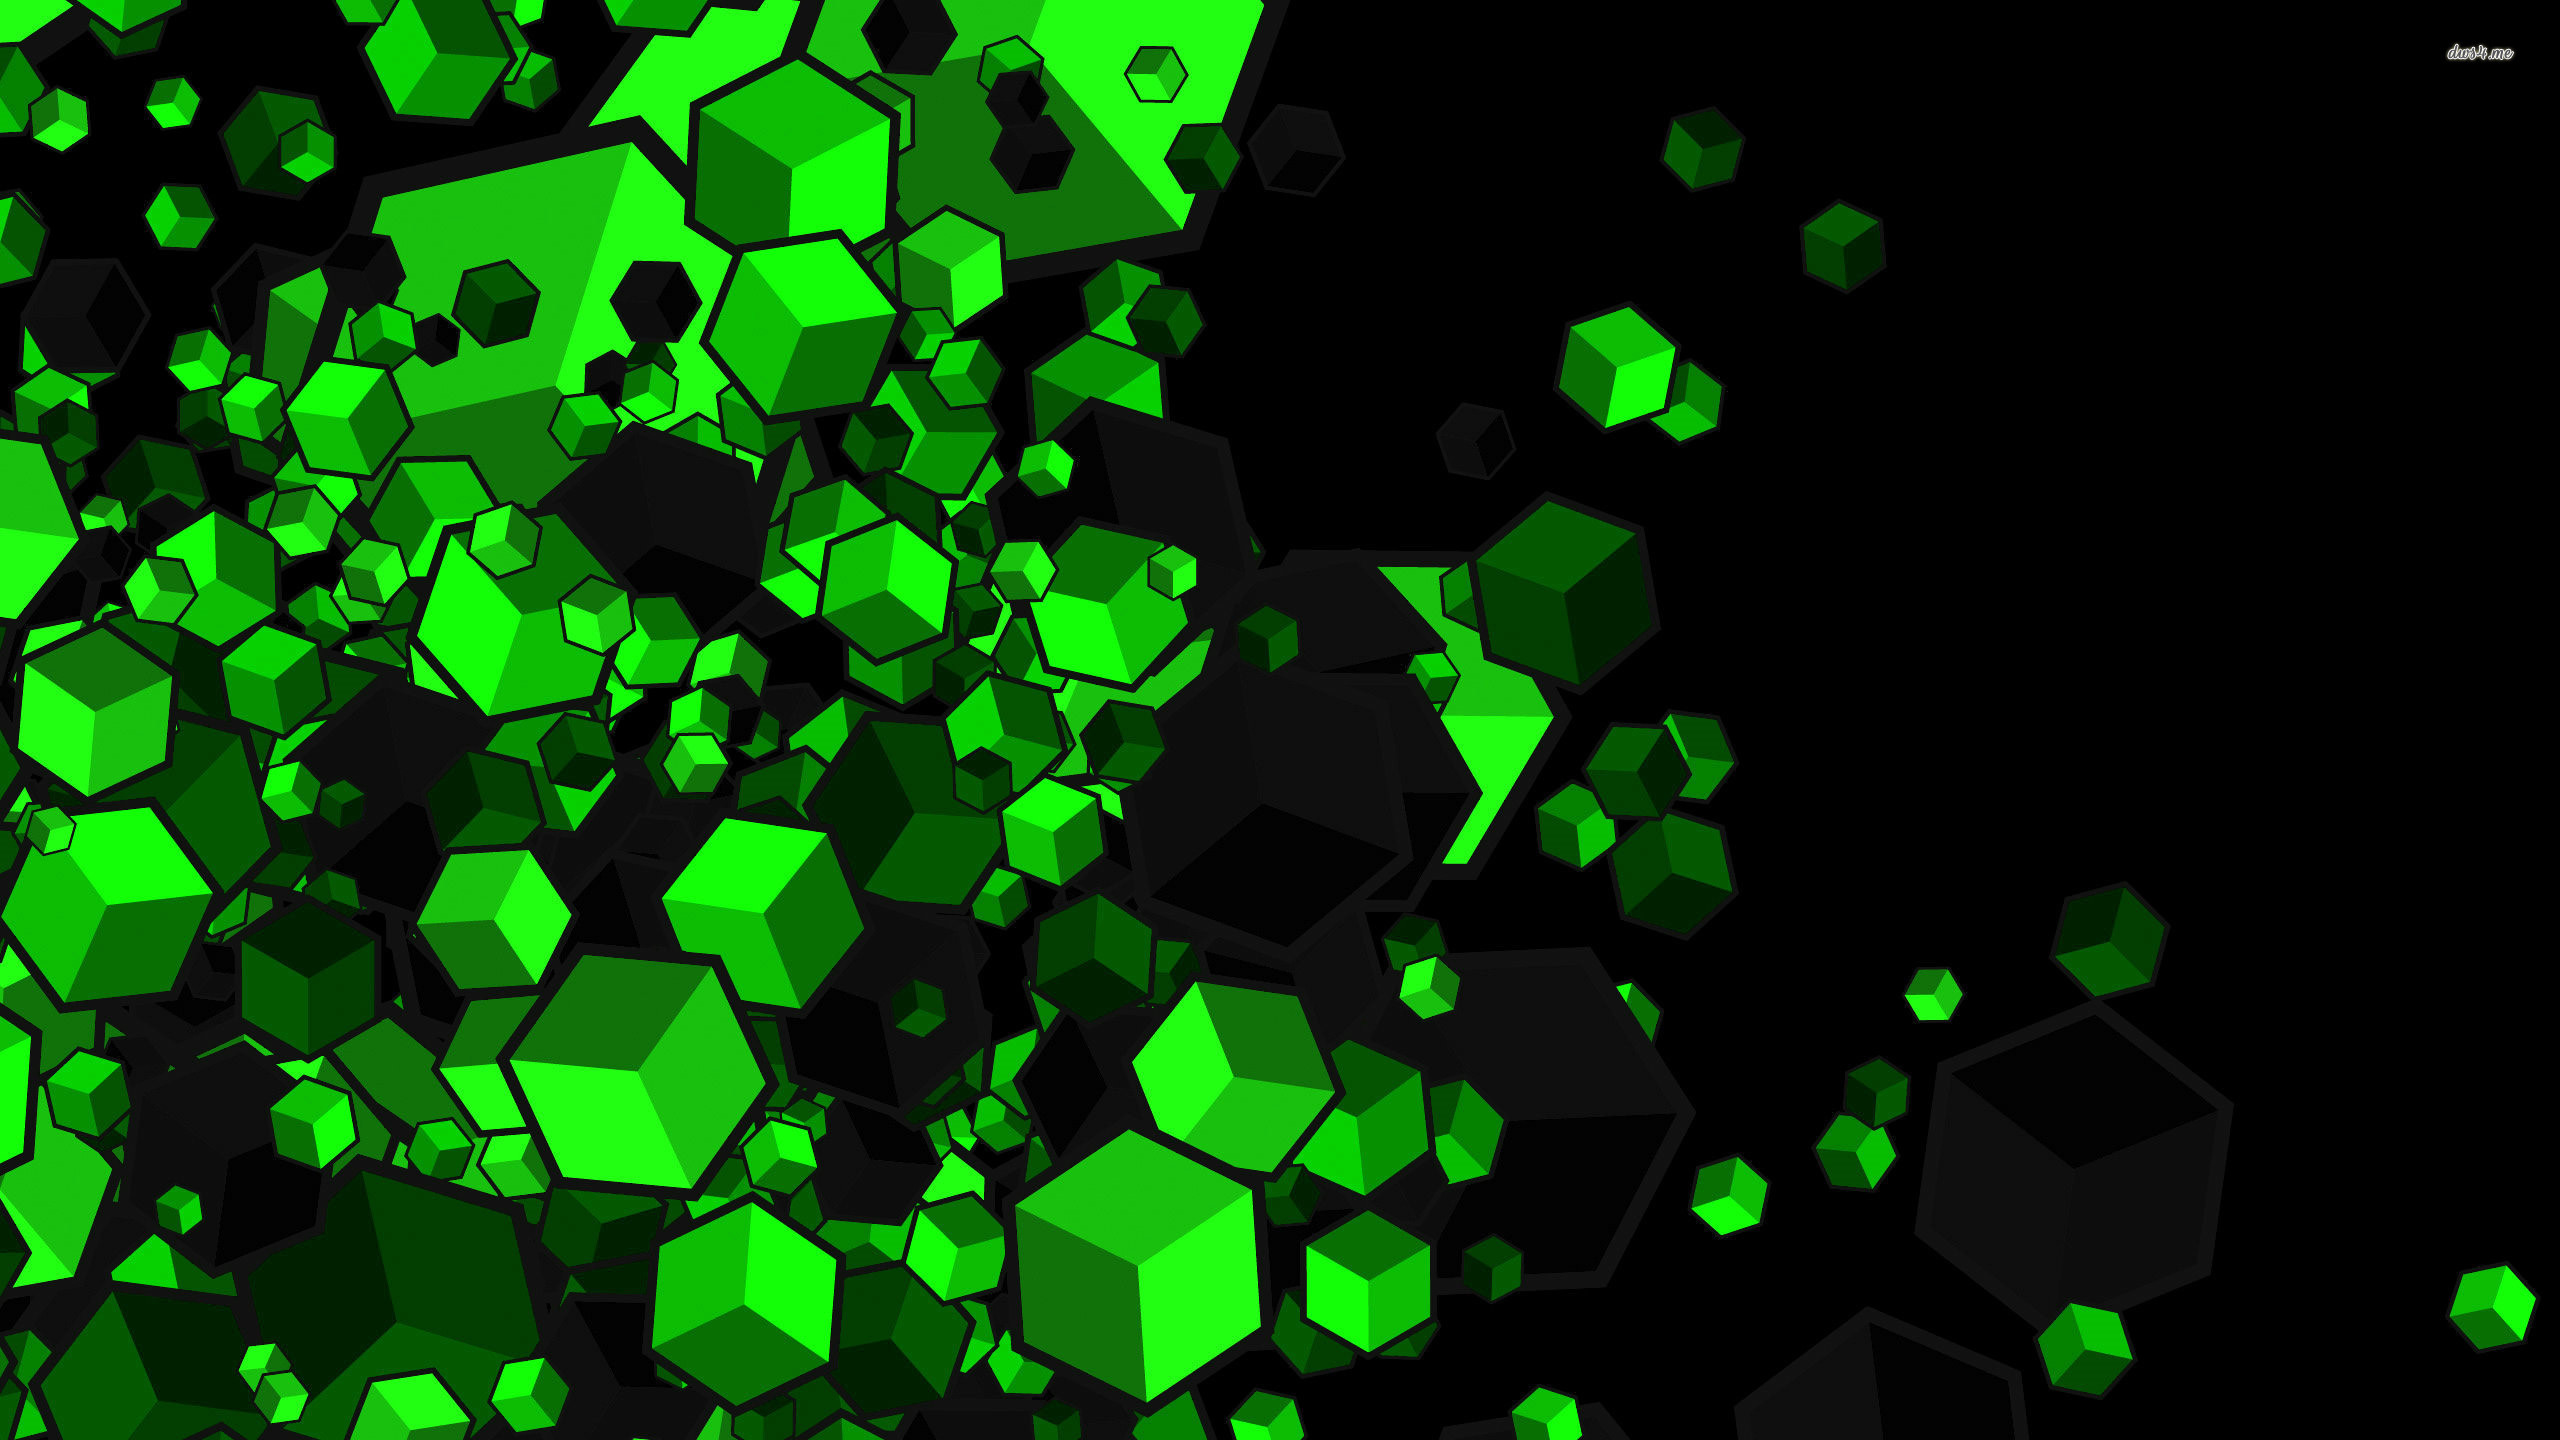 2560x1440 Green cubes on black background wallpaper - Vector .